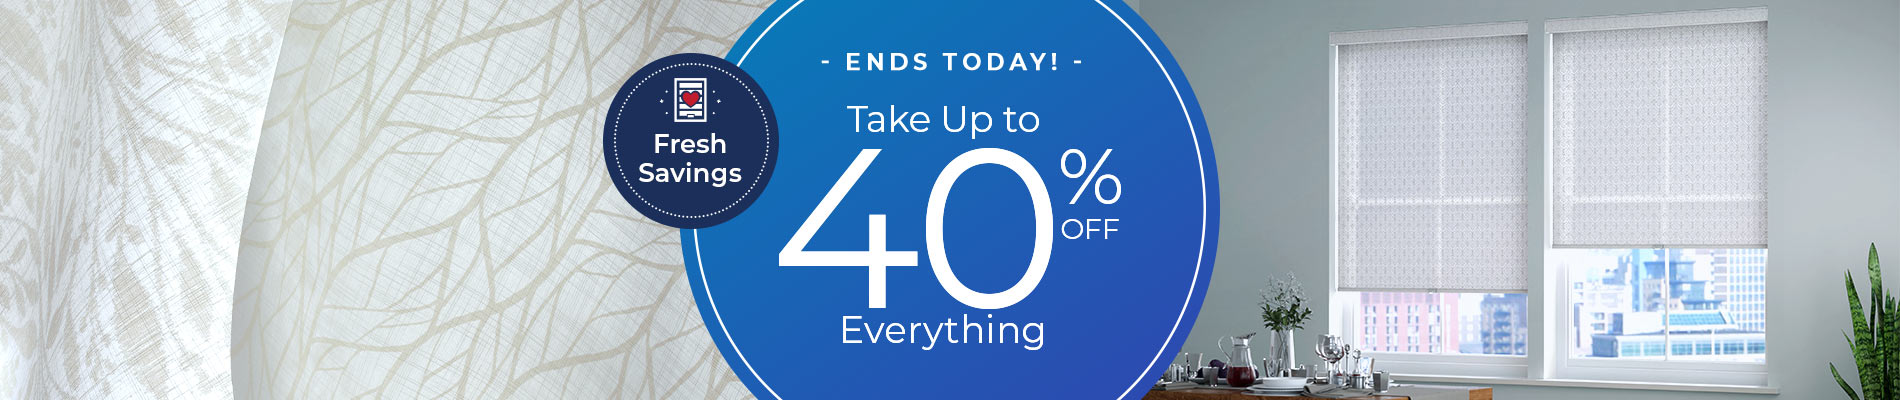 Take Up To 40% Off Everything